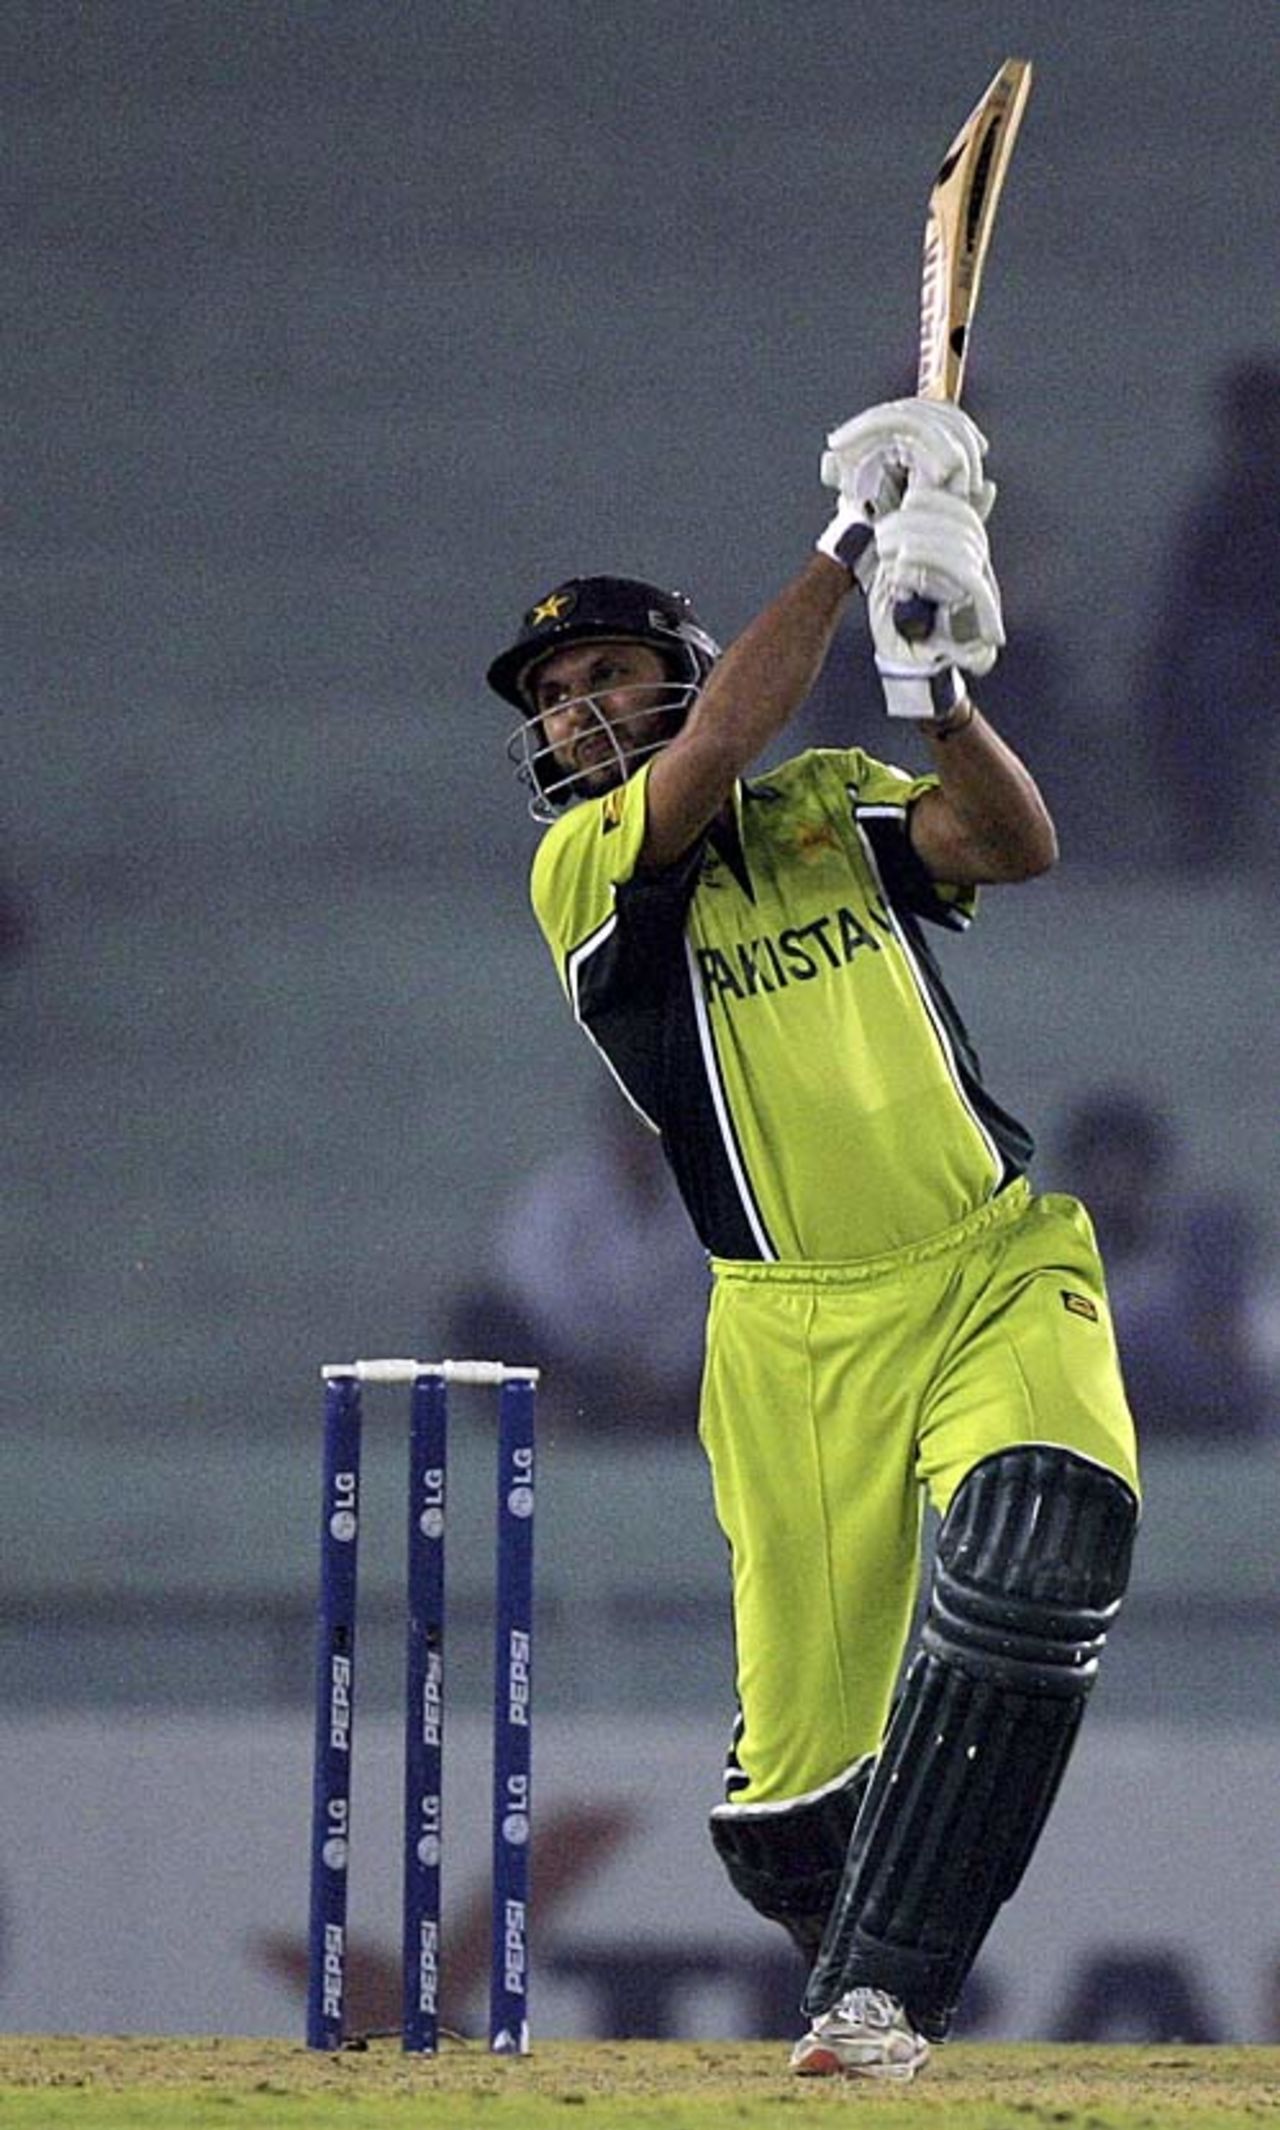 Shahid Afridi launches another one over the top, New Zealand v Pakistan, 8th match, Mohali, Champions Trophy, October 25, 2006